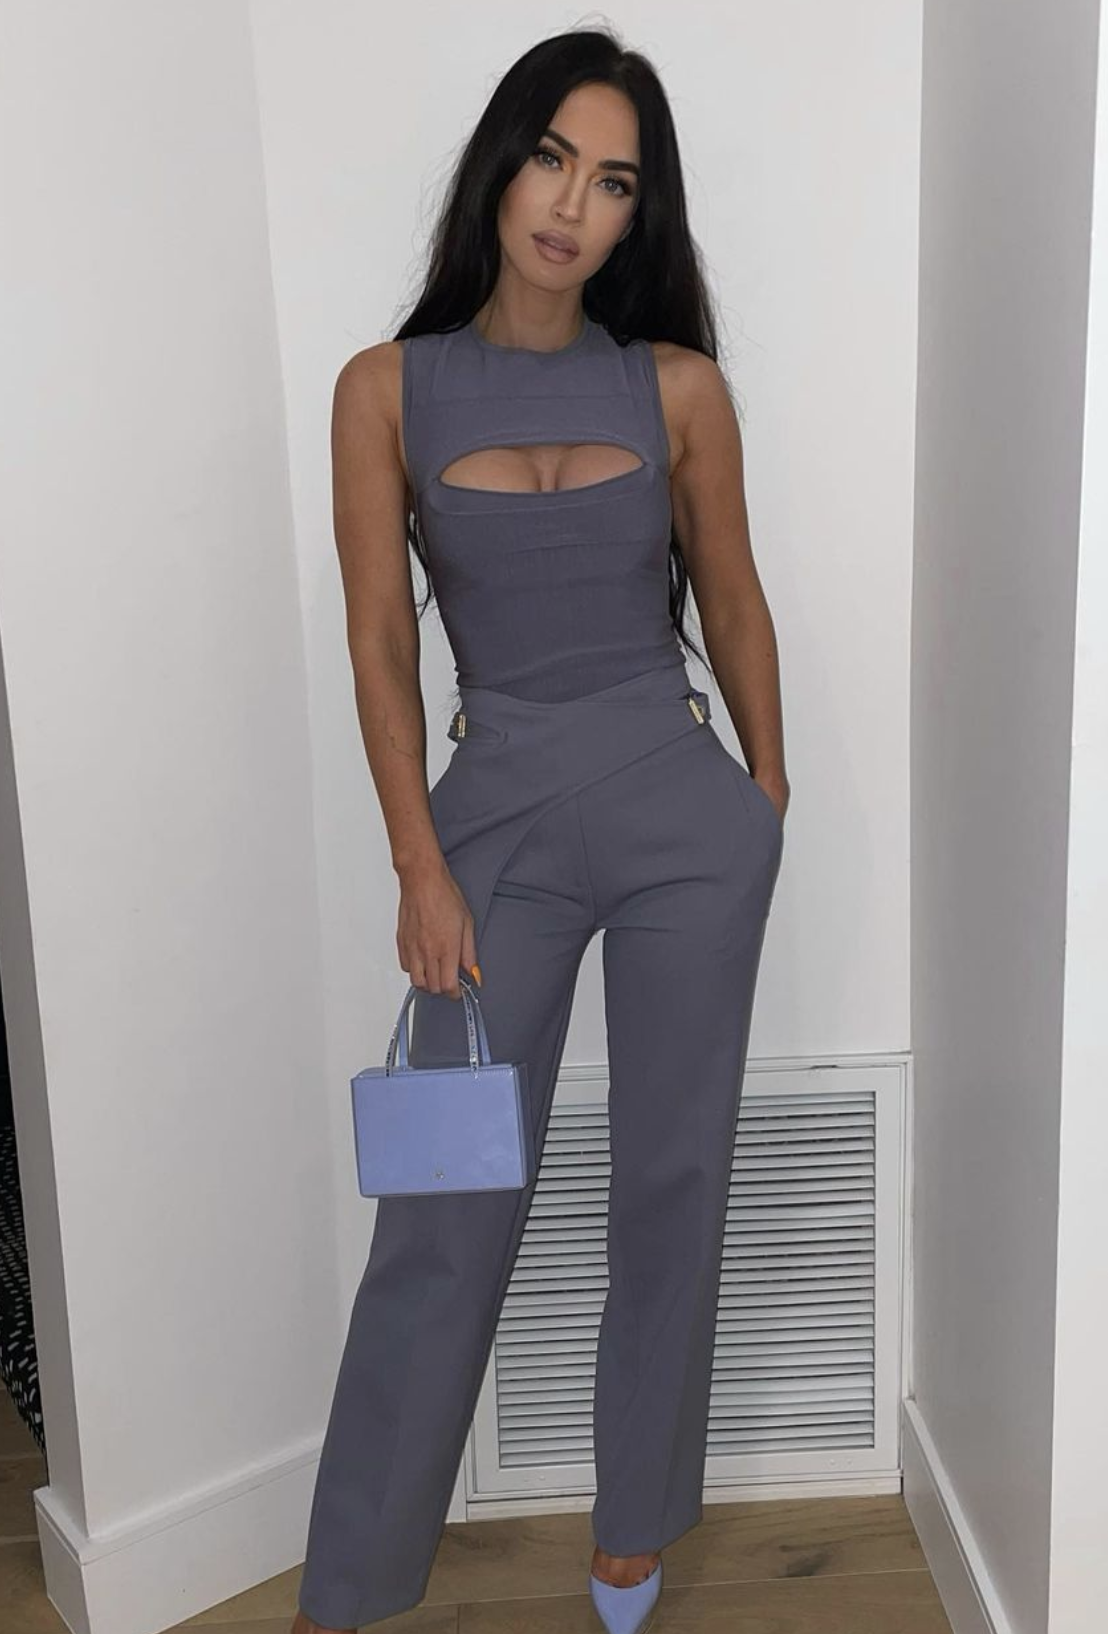 Megan wearing a pantsuit with a cutout on the top with a matching box purse and heels